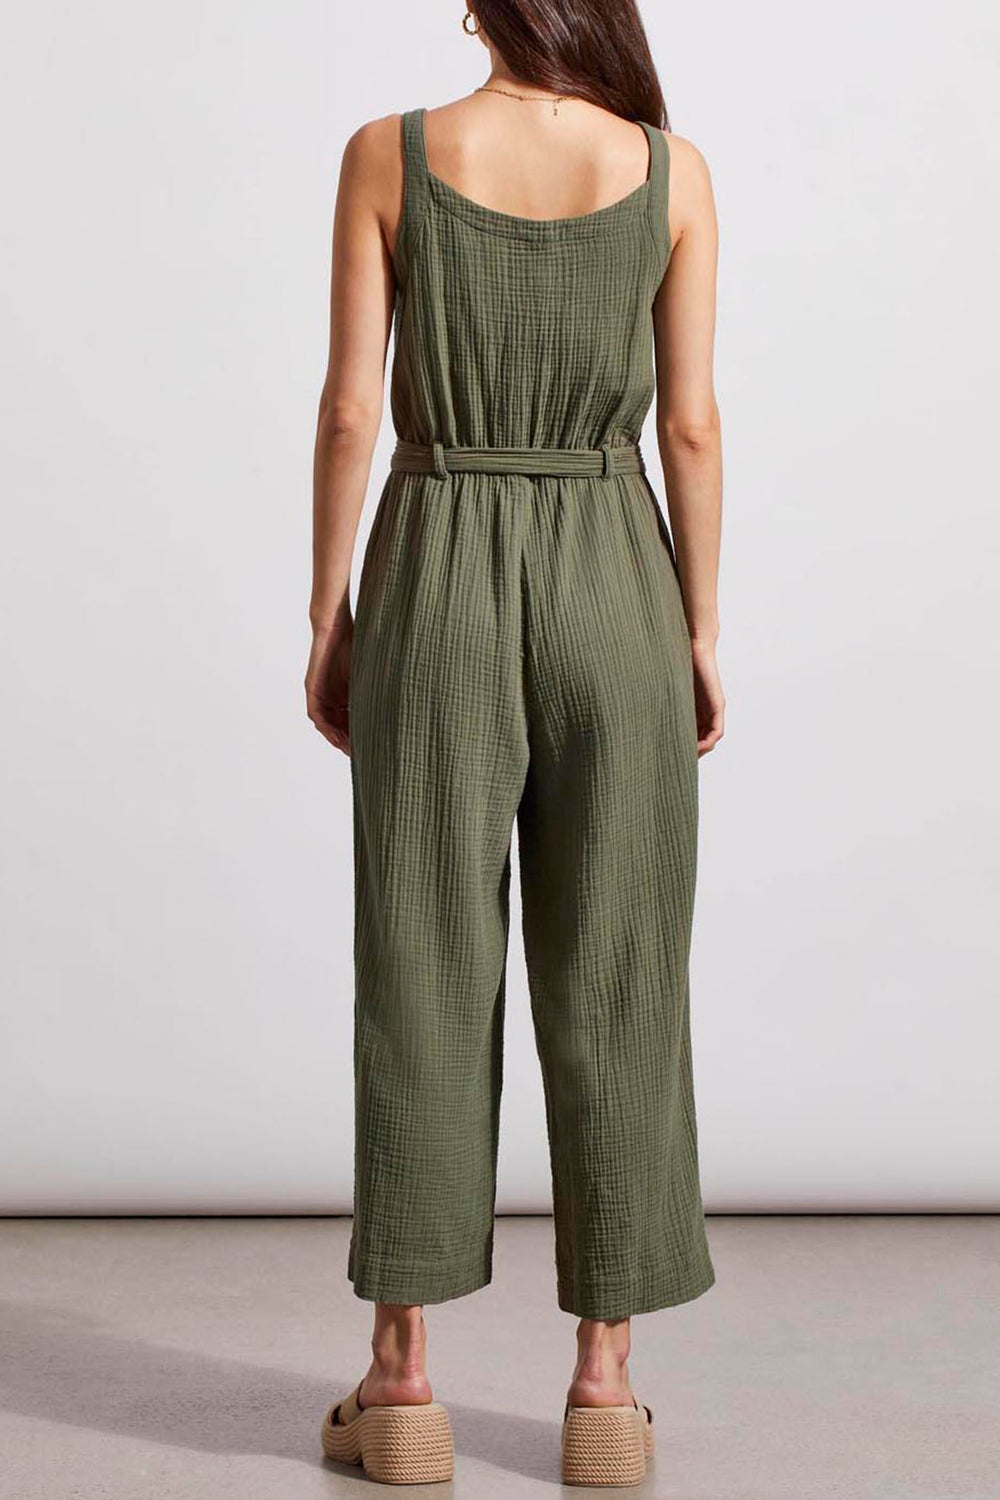 Tribal 7676O Fern Green Cotton Jumpsuit - Experience Boutique